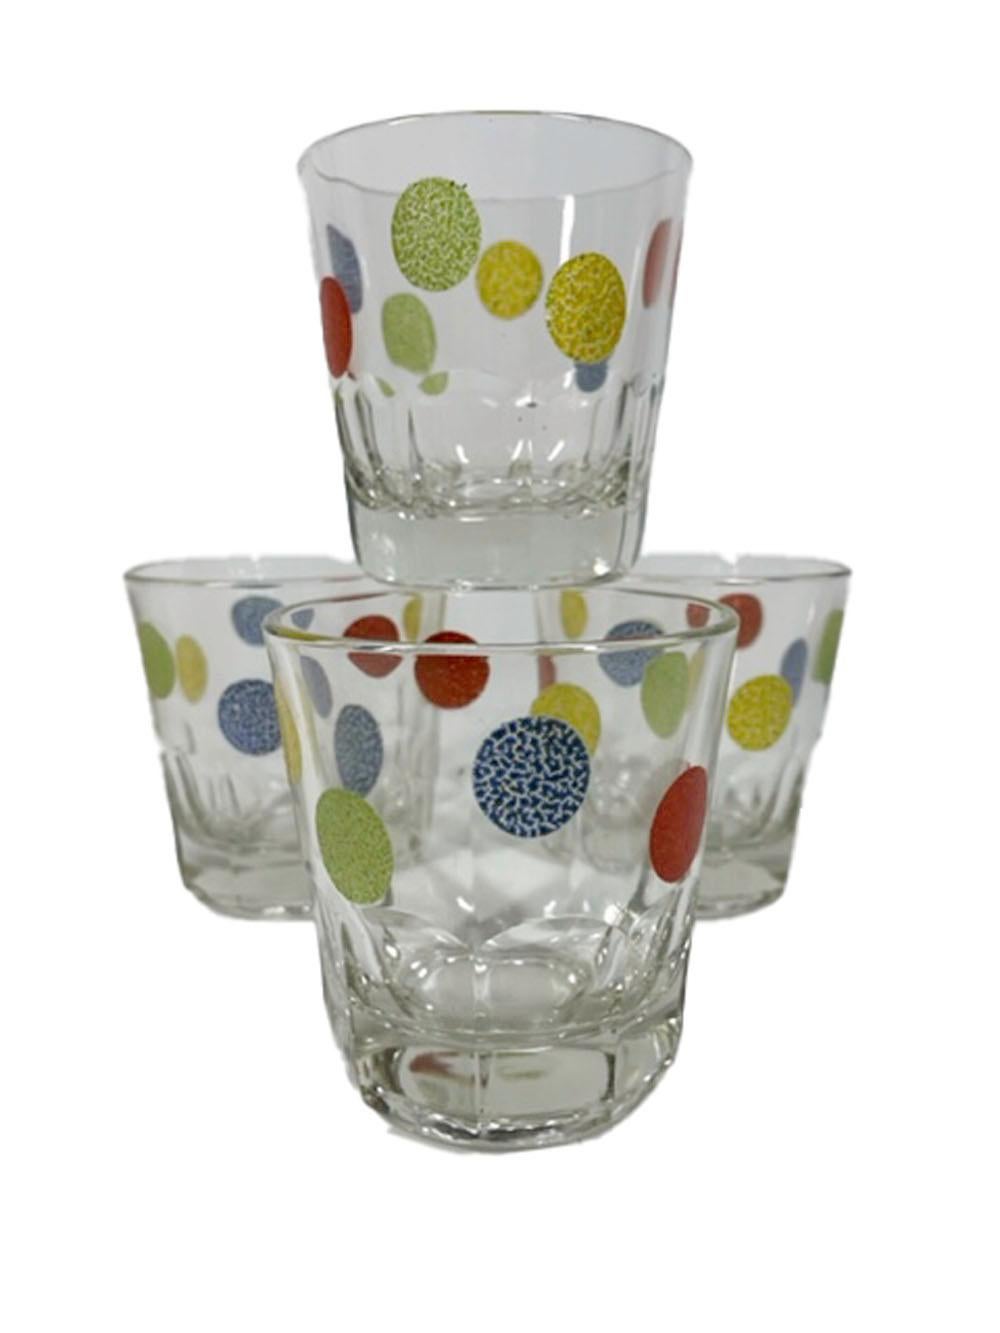 Set of 4 vintage rocks glasses with paneled bases decorated with raised, textured enamel dots in green, yellow, blue and red.